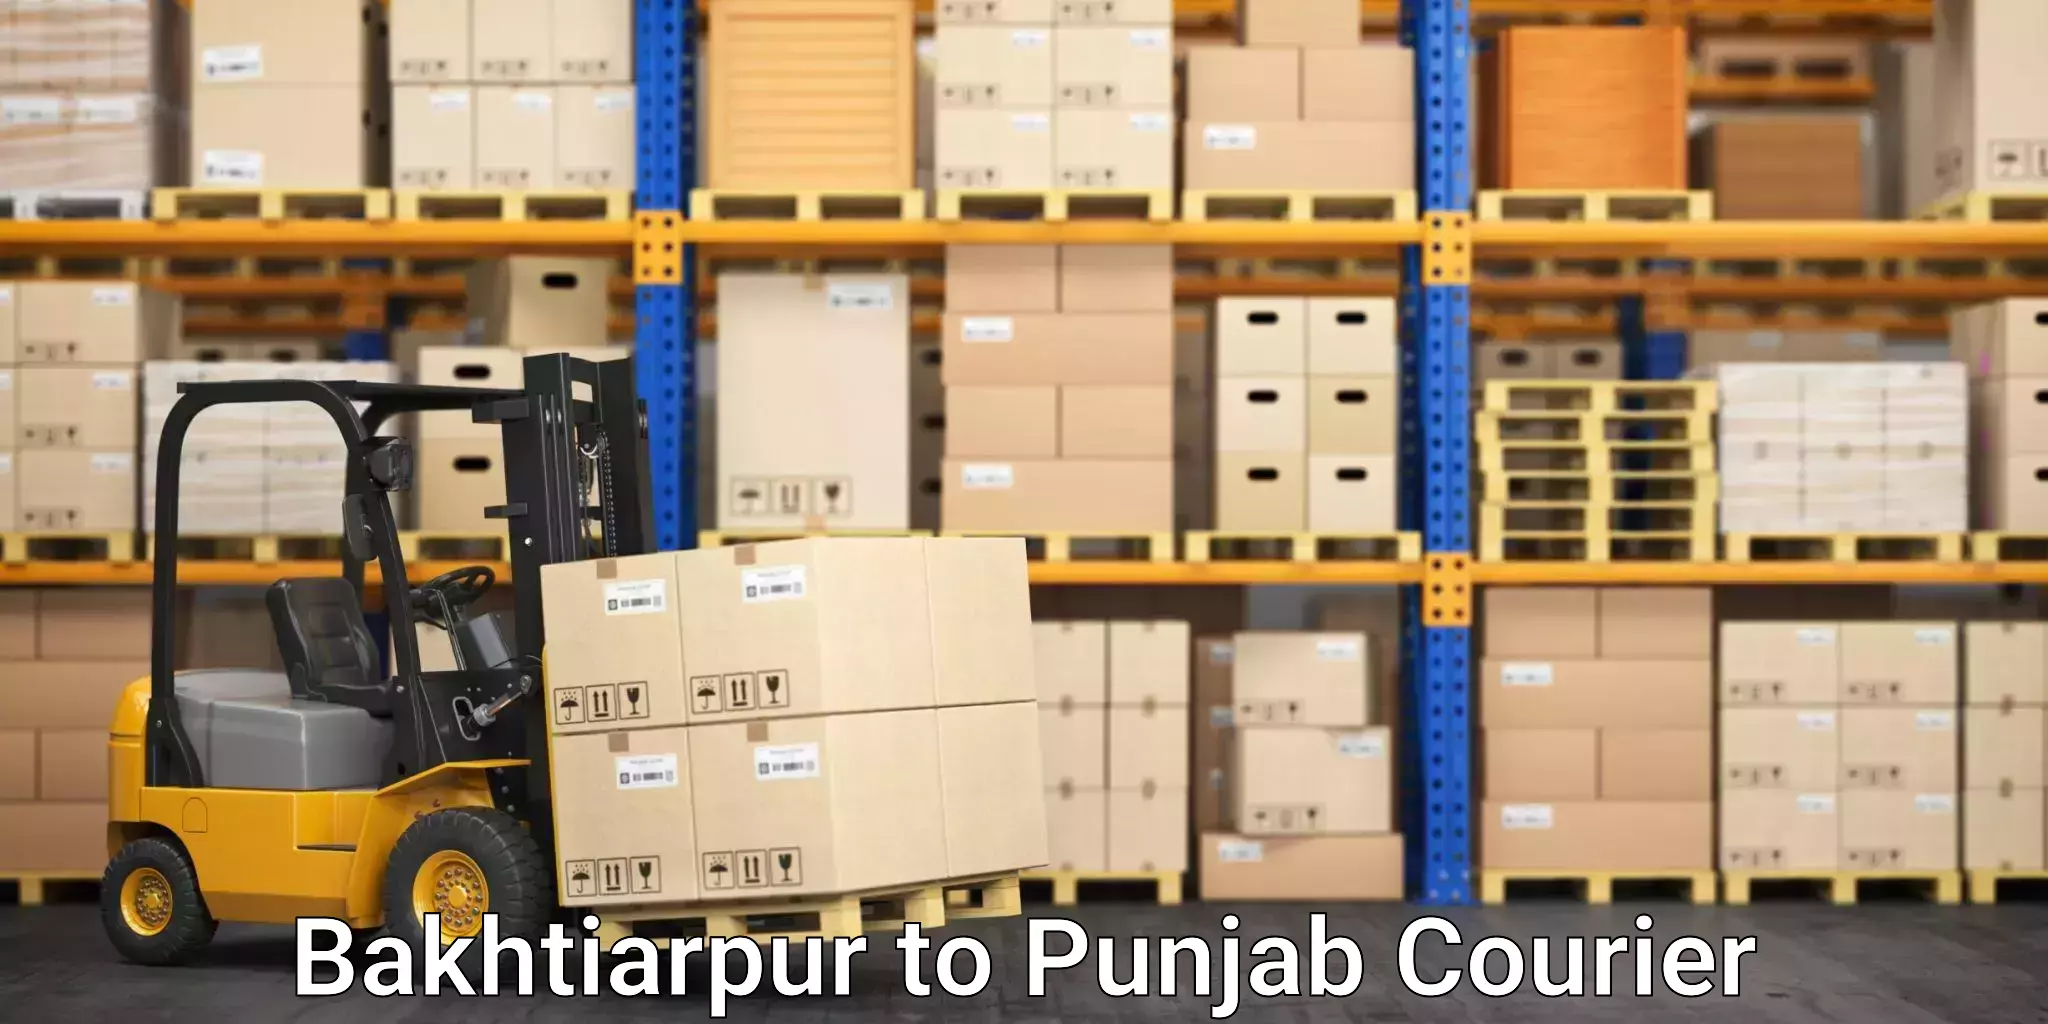 Quality moving and storage in Bakhtiarpur to Ludhiana